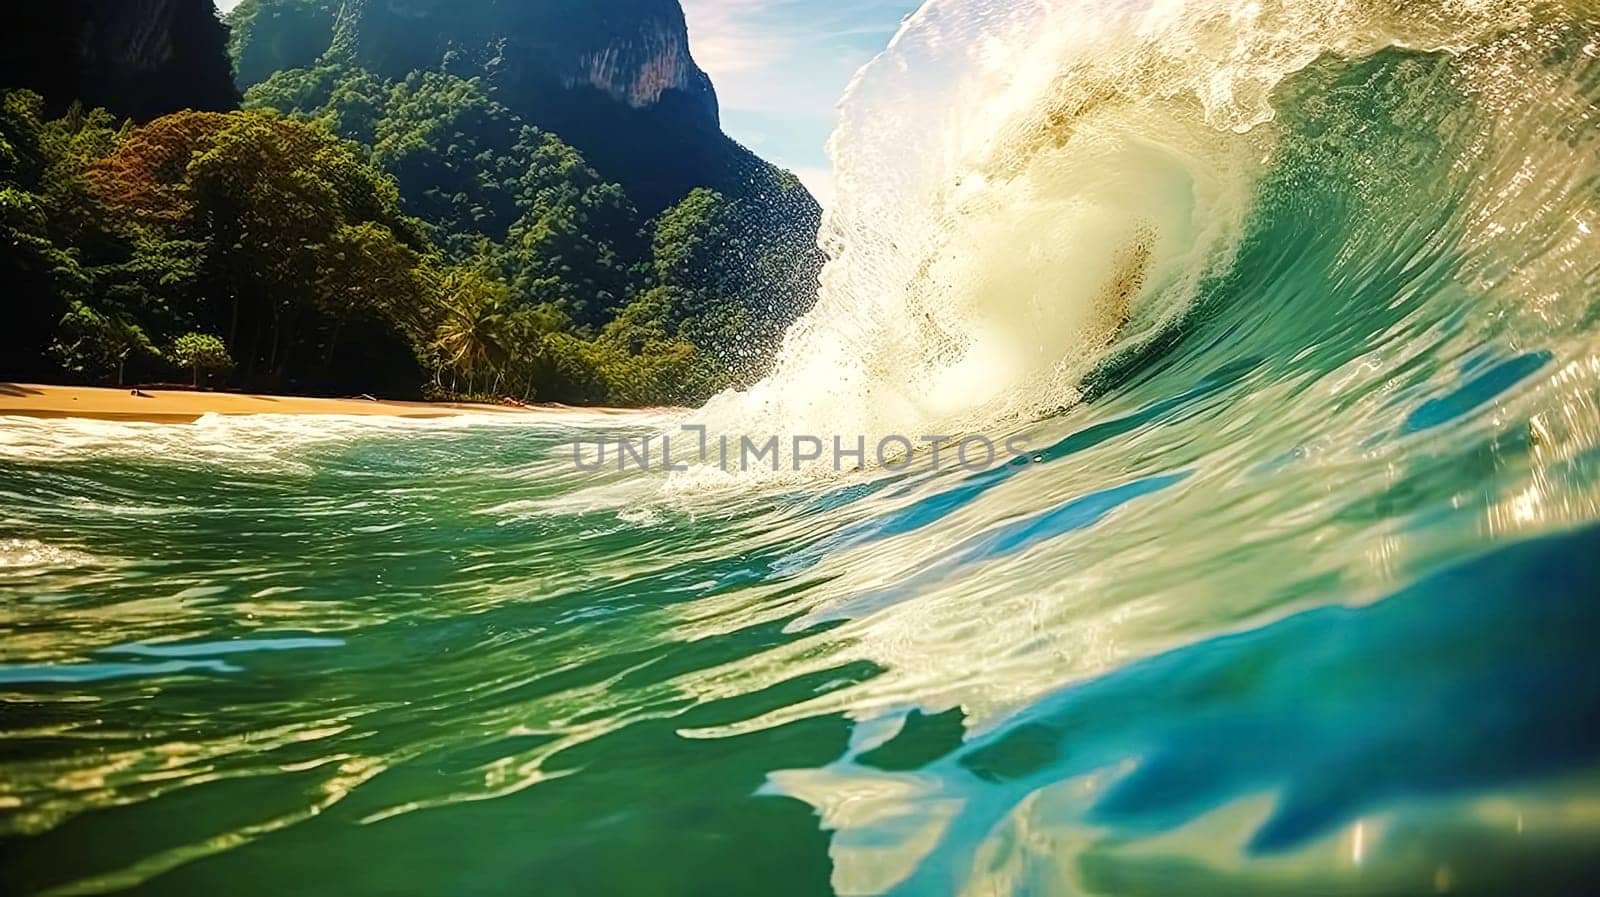 A wave is crashing on a beach with trees in the background. The water is a beautiful shade of blue